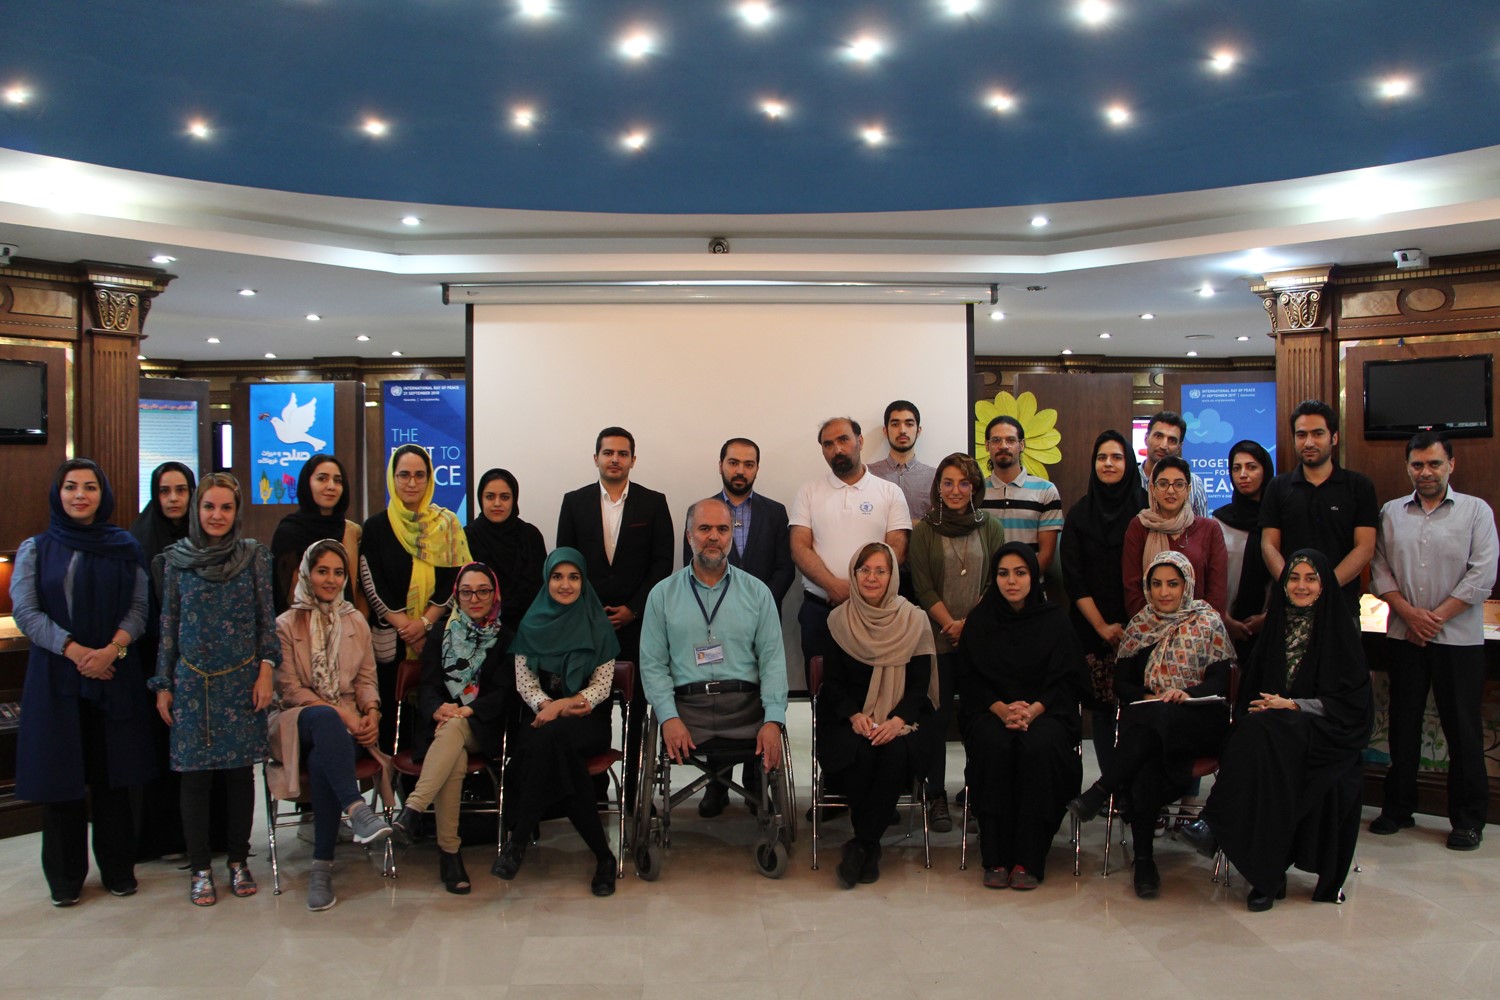 workshop-on-the-occasion-of-international-day-of-peace-at-tehran-peace-museum